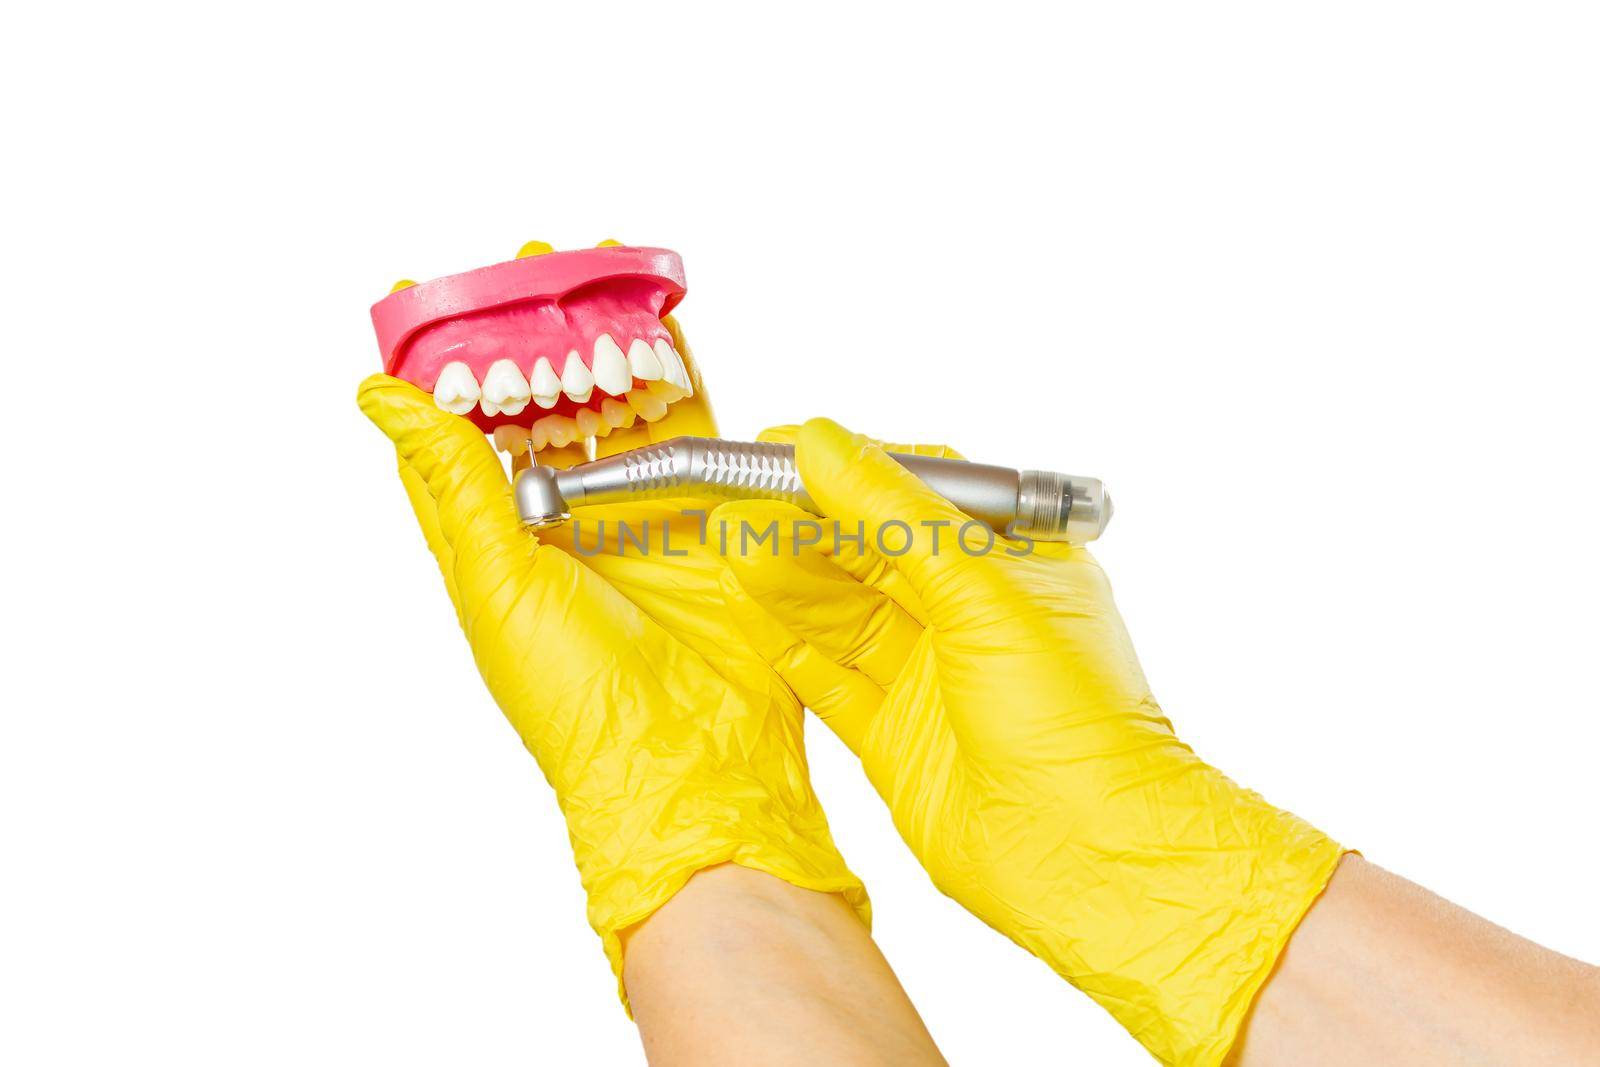 Head of high-speed dental handpiece with bur and the layout of human jaw in dentist's hands on the white isolated background. Dental instruments for dental treatment. Close-up view.